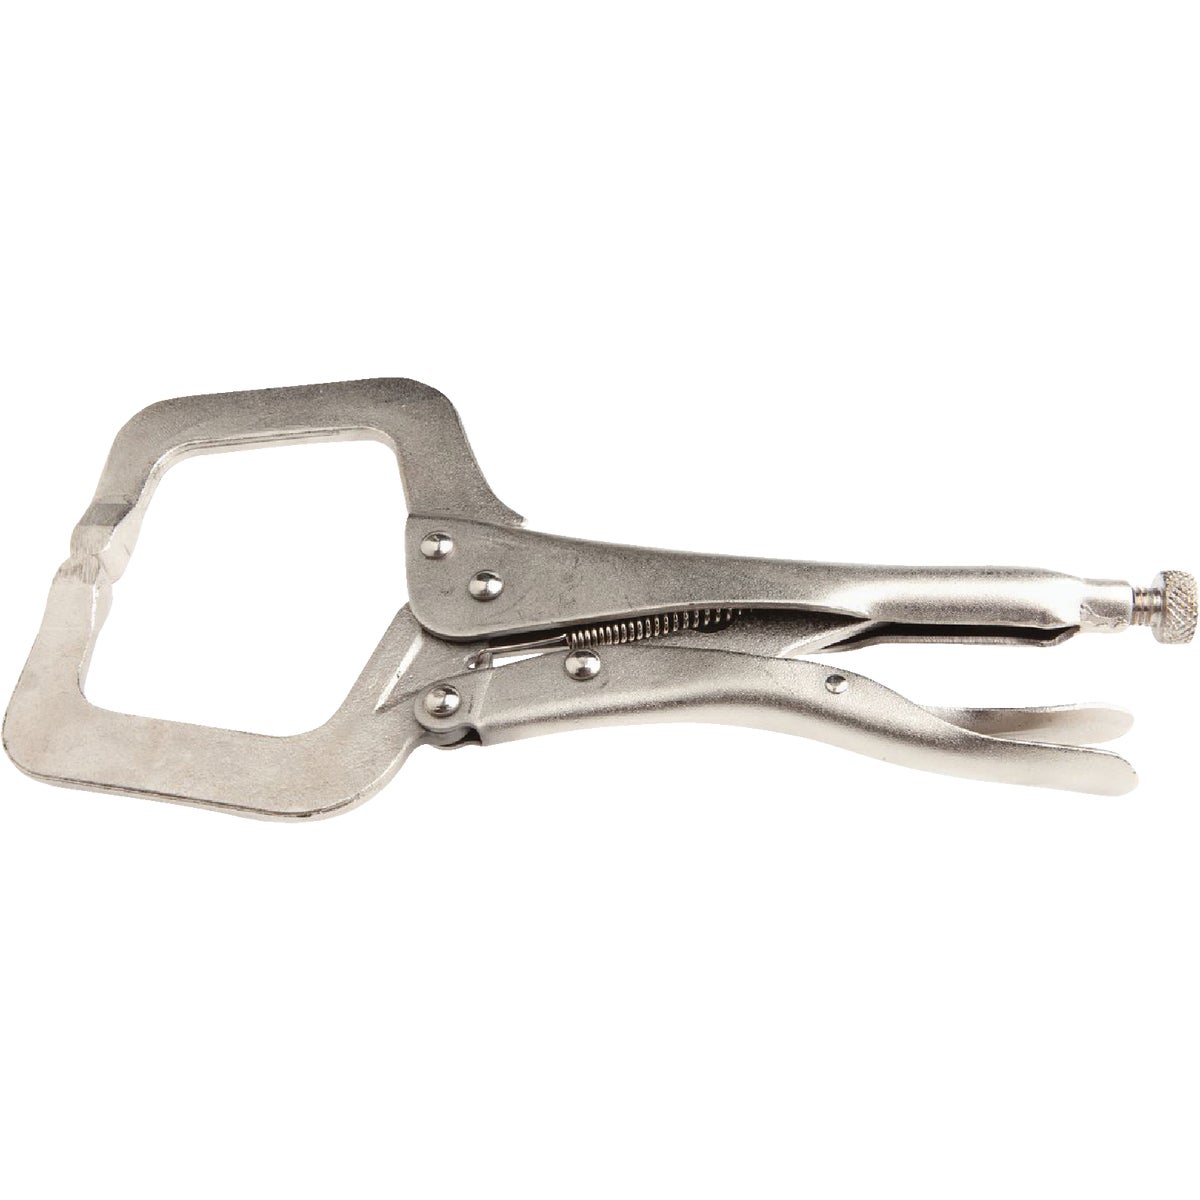 Item 301393, Deluxe locking pliers type C-clamp has extra clamping capacity for large 